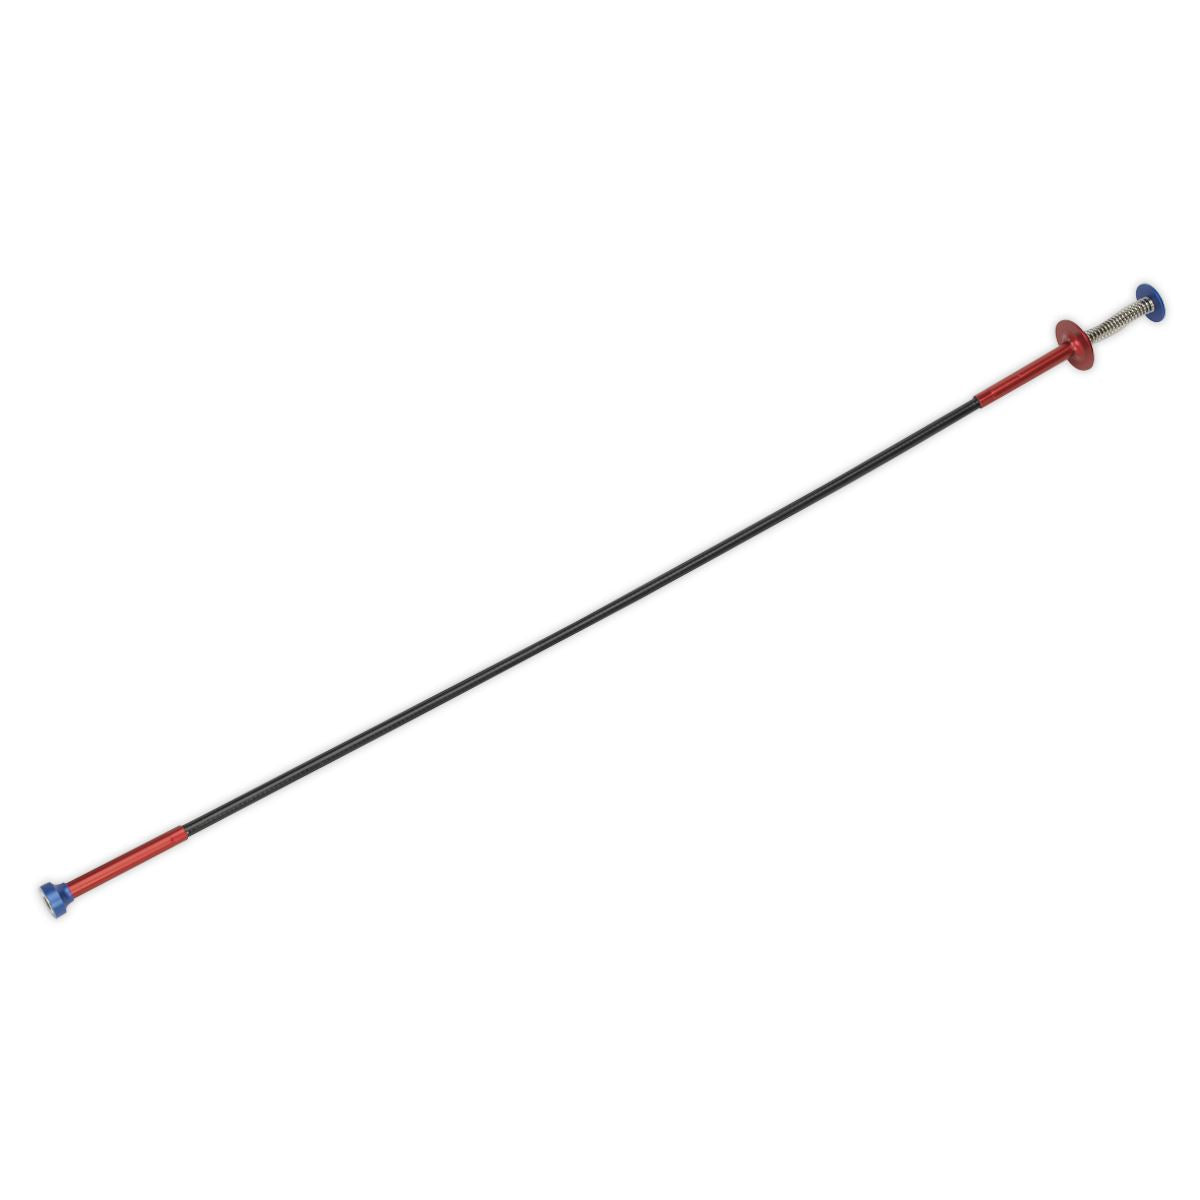 Sealey 700mm Flexible Magnetic Pick Up & Claw Tool Cable 0.7kg Garage Tools